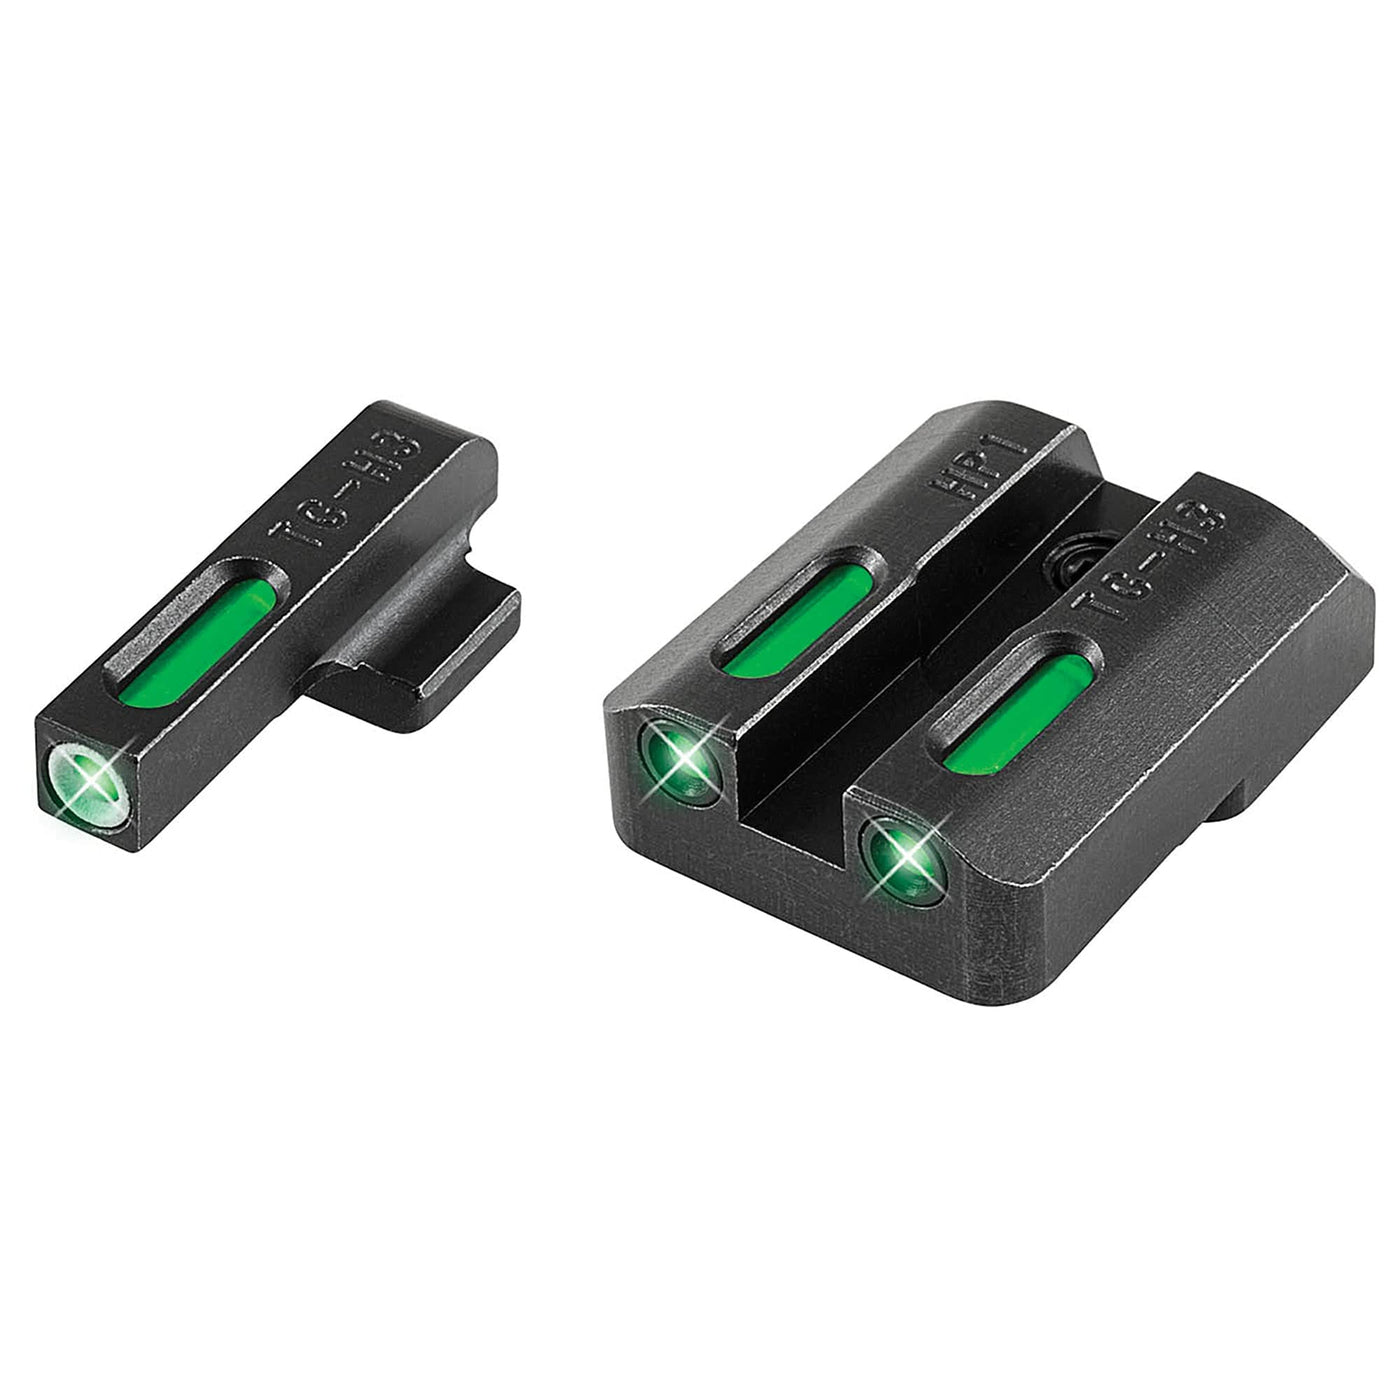 Truglo Truglo Brite-site Tfx Trit/fo Hkp30 Sights/Lasers/Lights